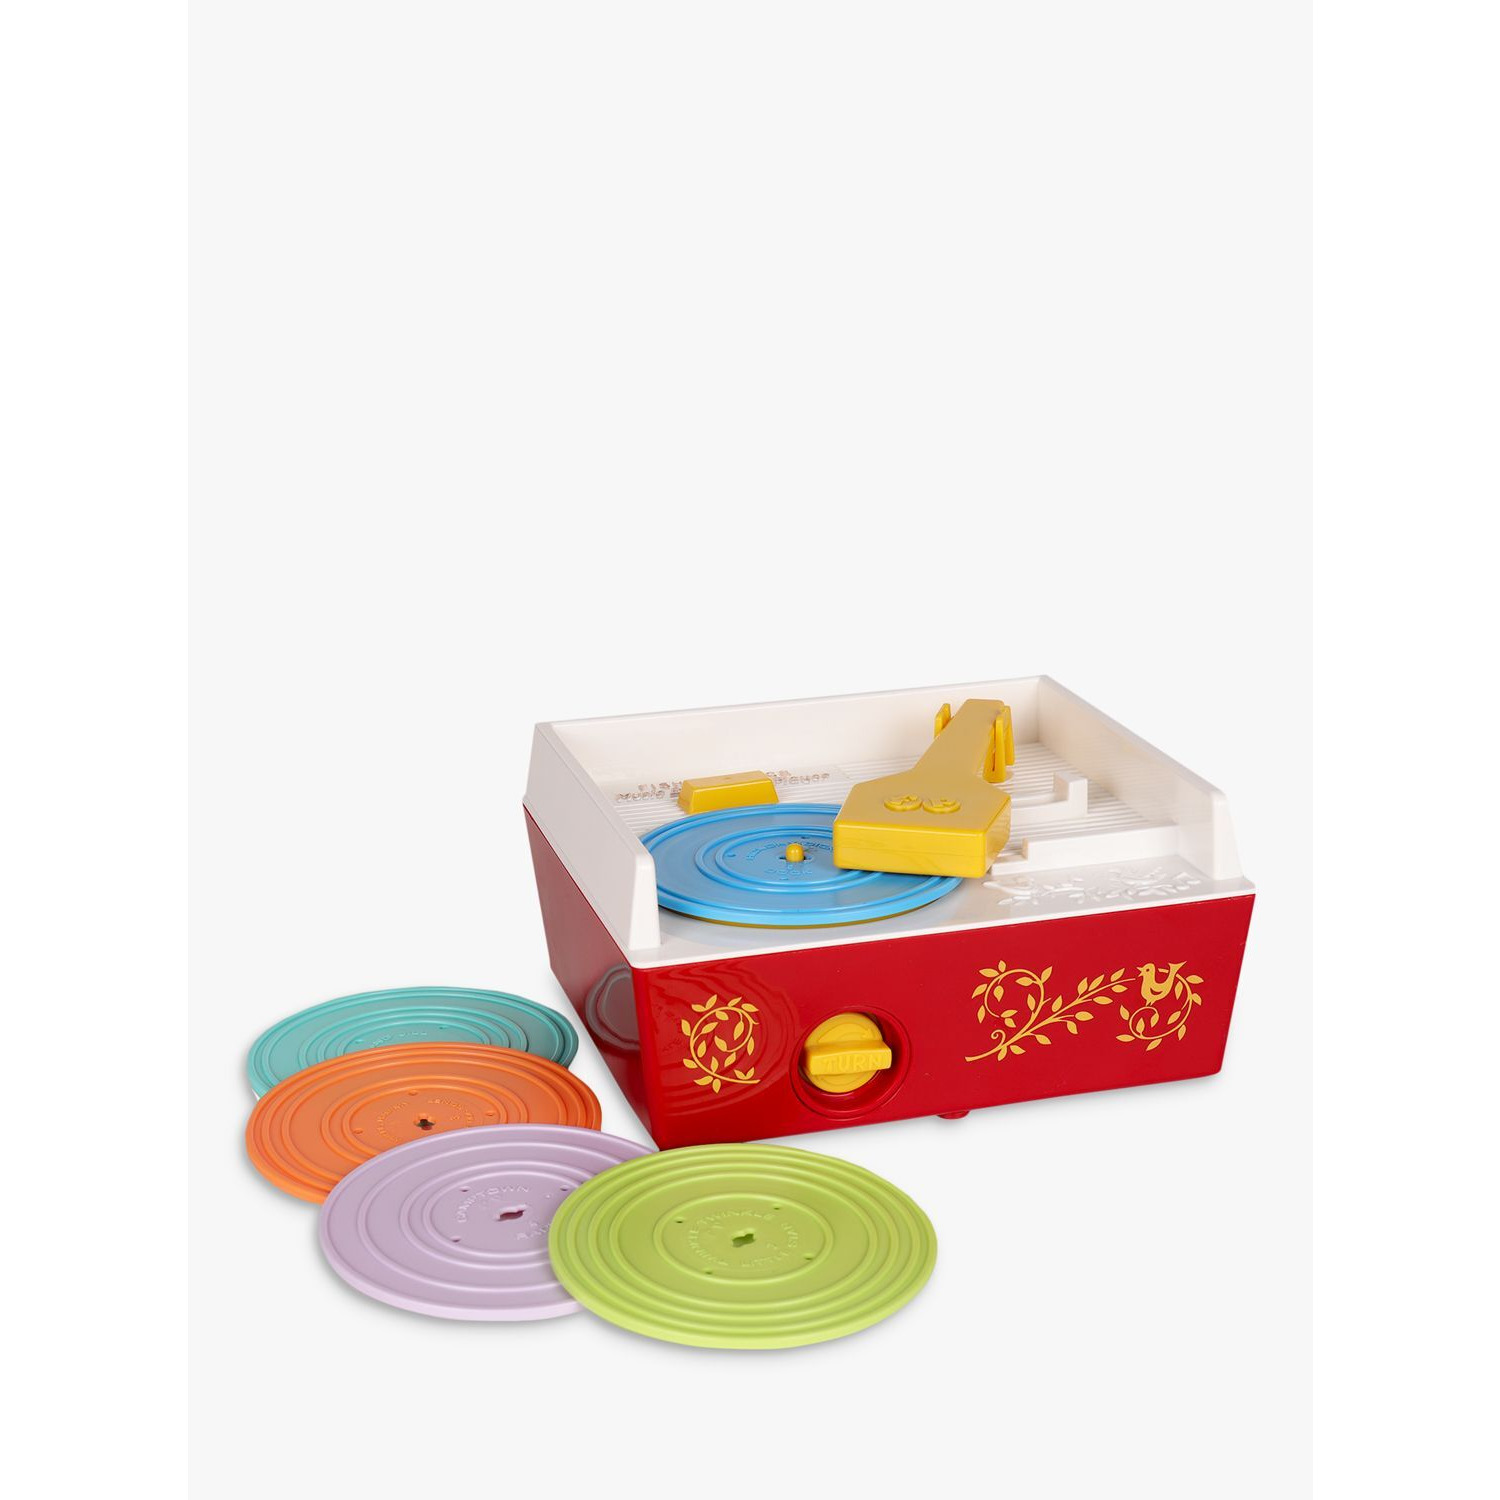 assets%2Fproduct images%2Fjohn lewis%2F237987954%2Ffisher price music box record player 1171a0eb